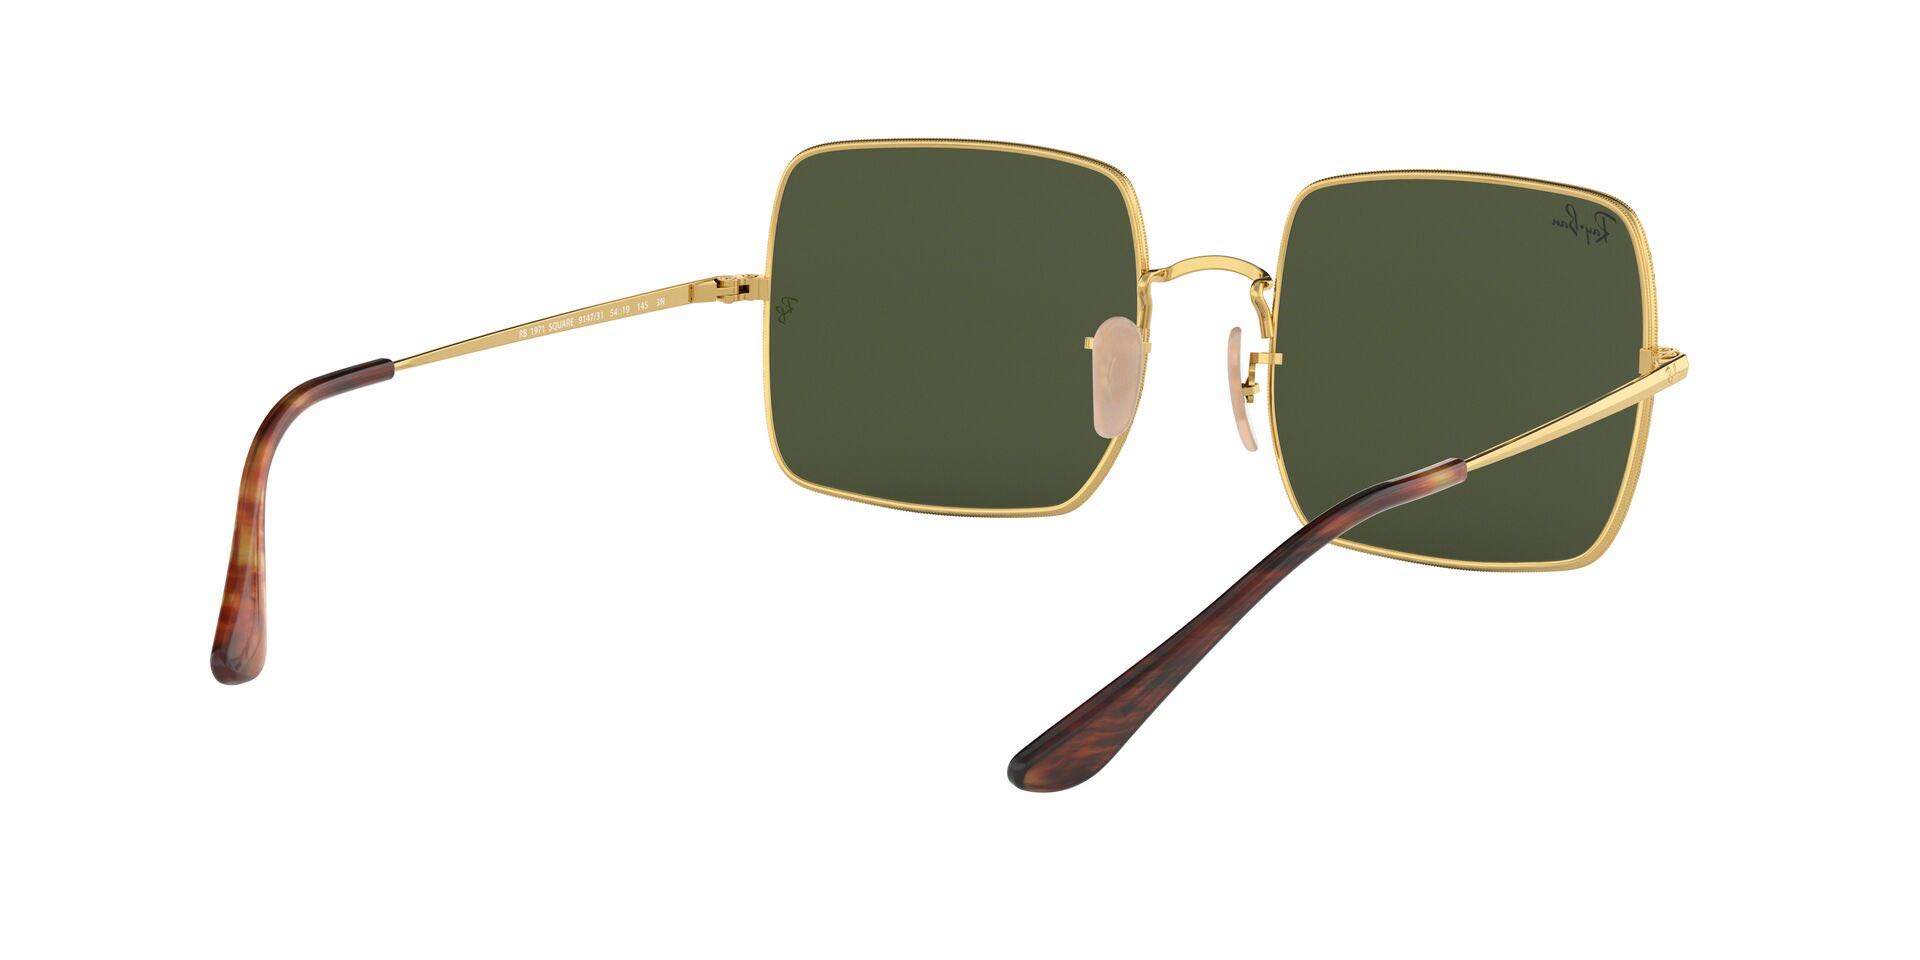 ray ban 1971 square classic